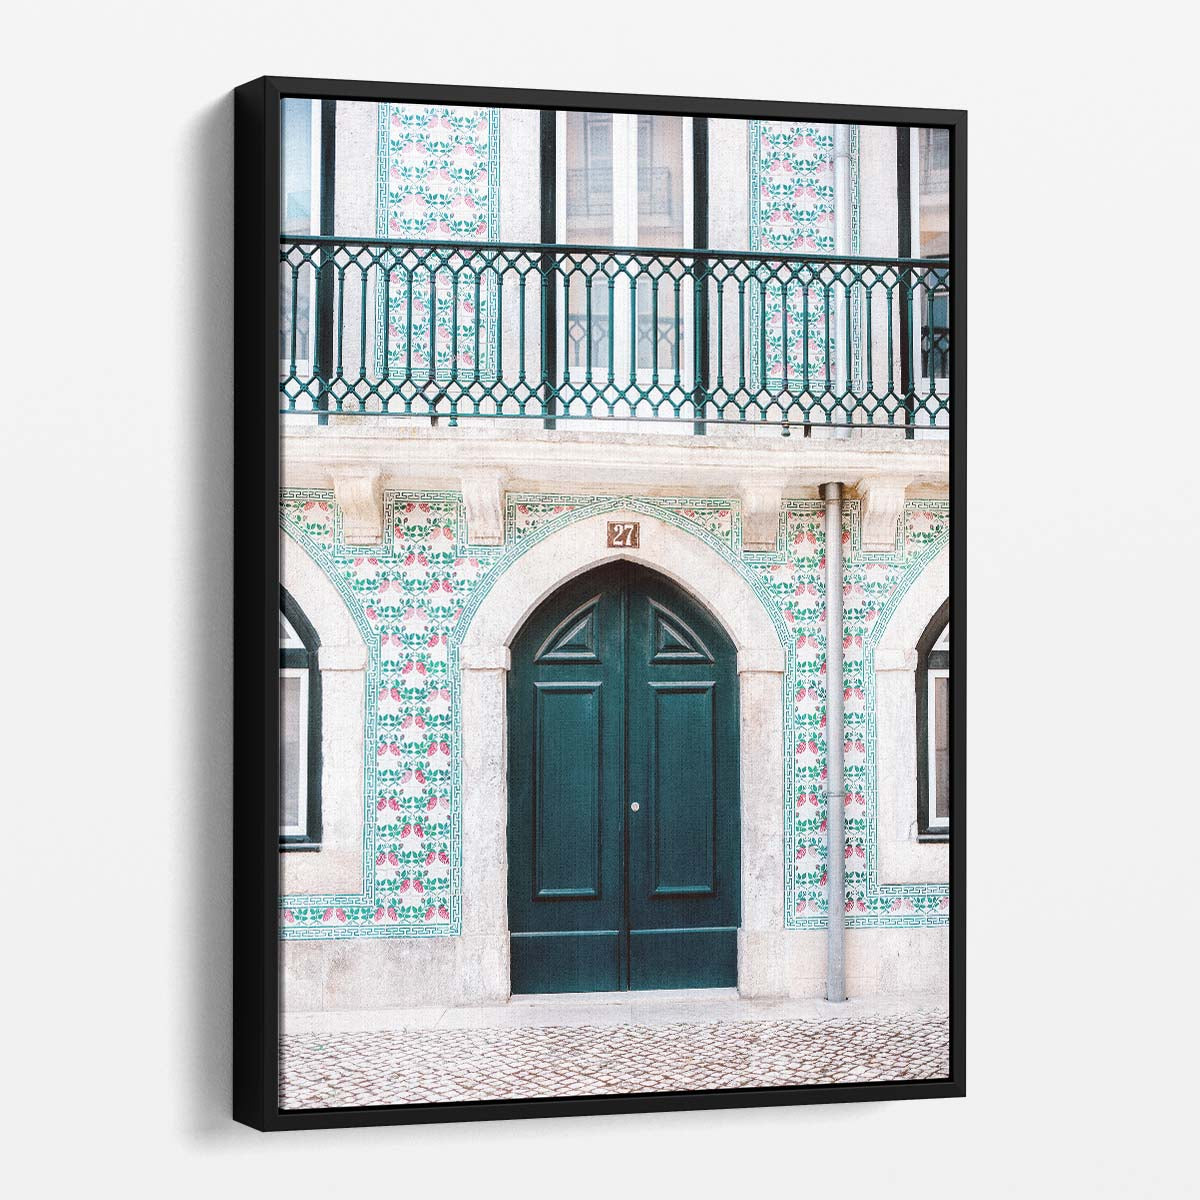 Architecture Photography of Green Door in Lisbon, Portugal by Luxuriance Designs, made in USA